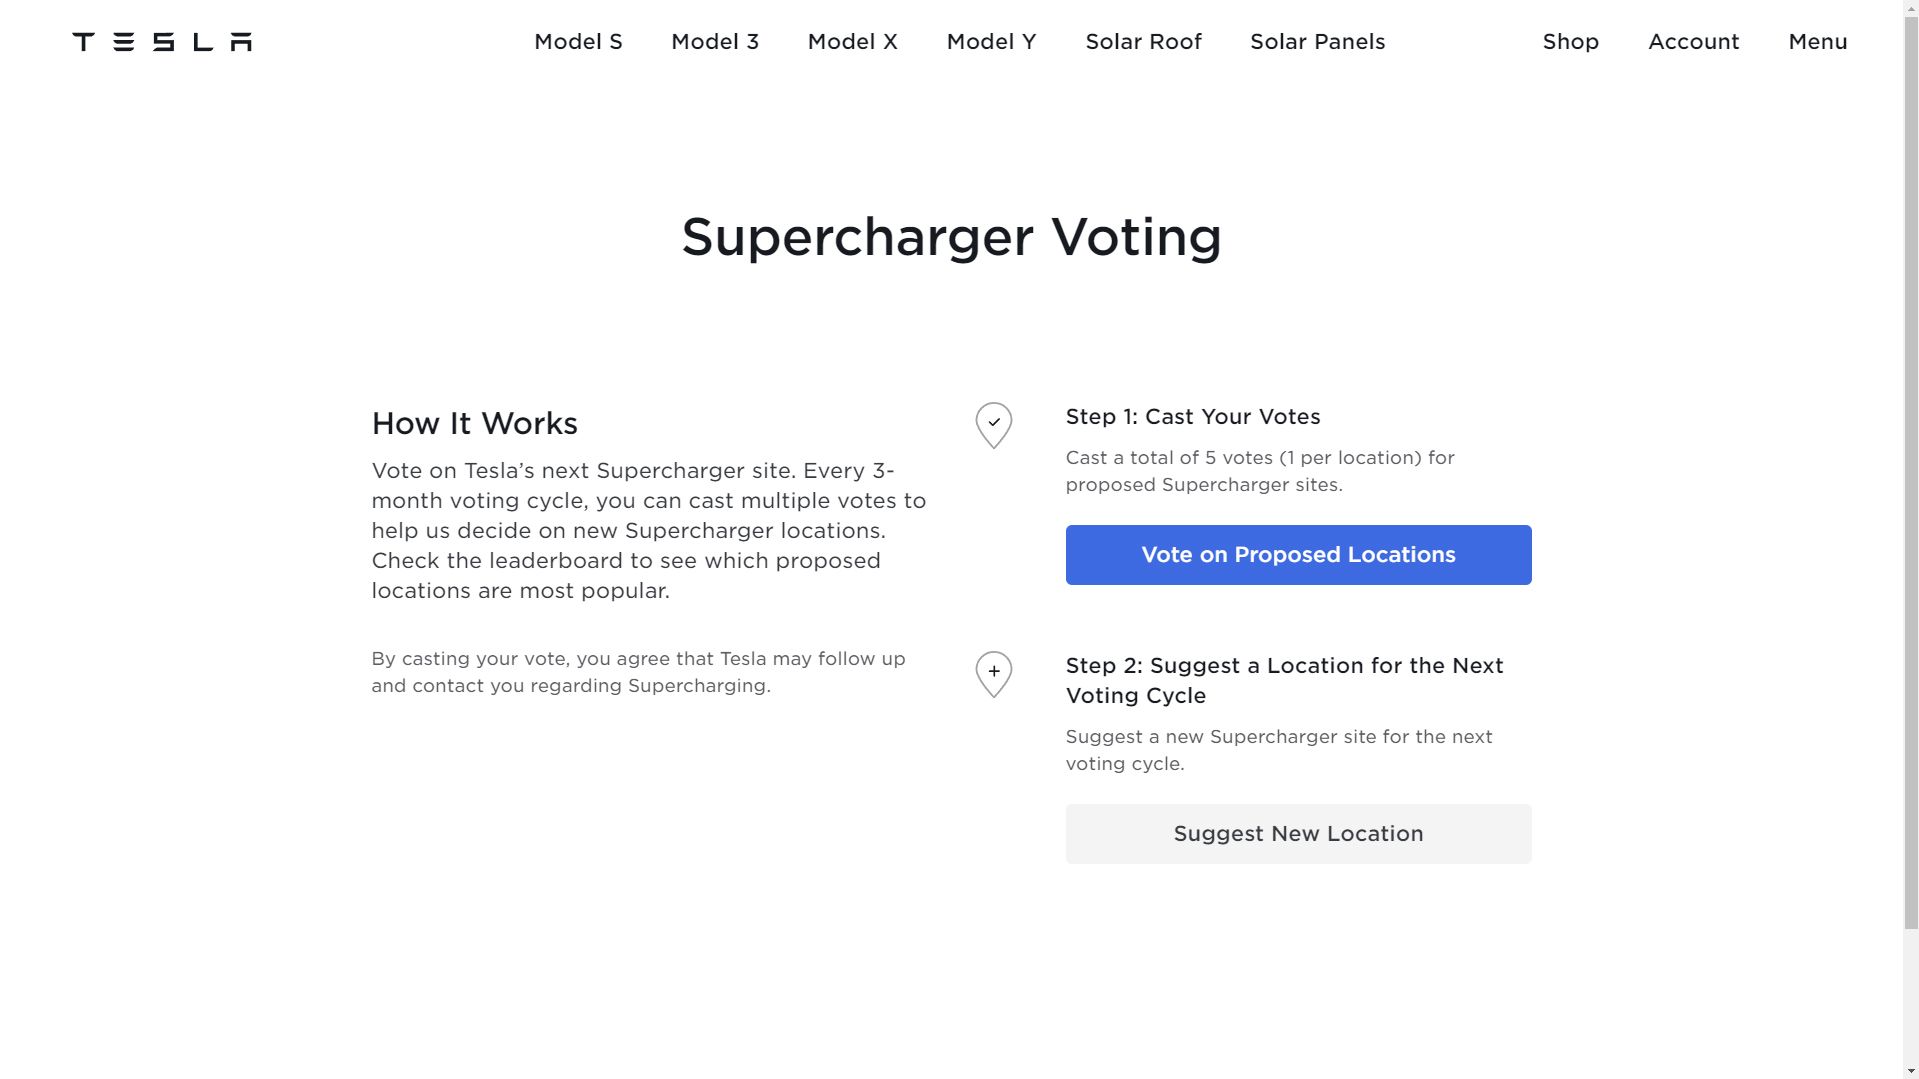 Supercharger Voting homepage screenshot